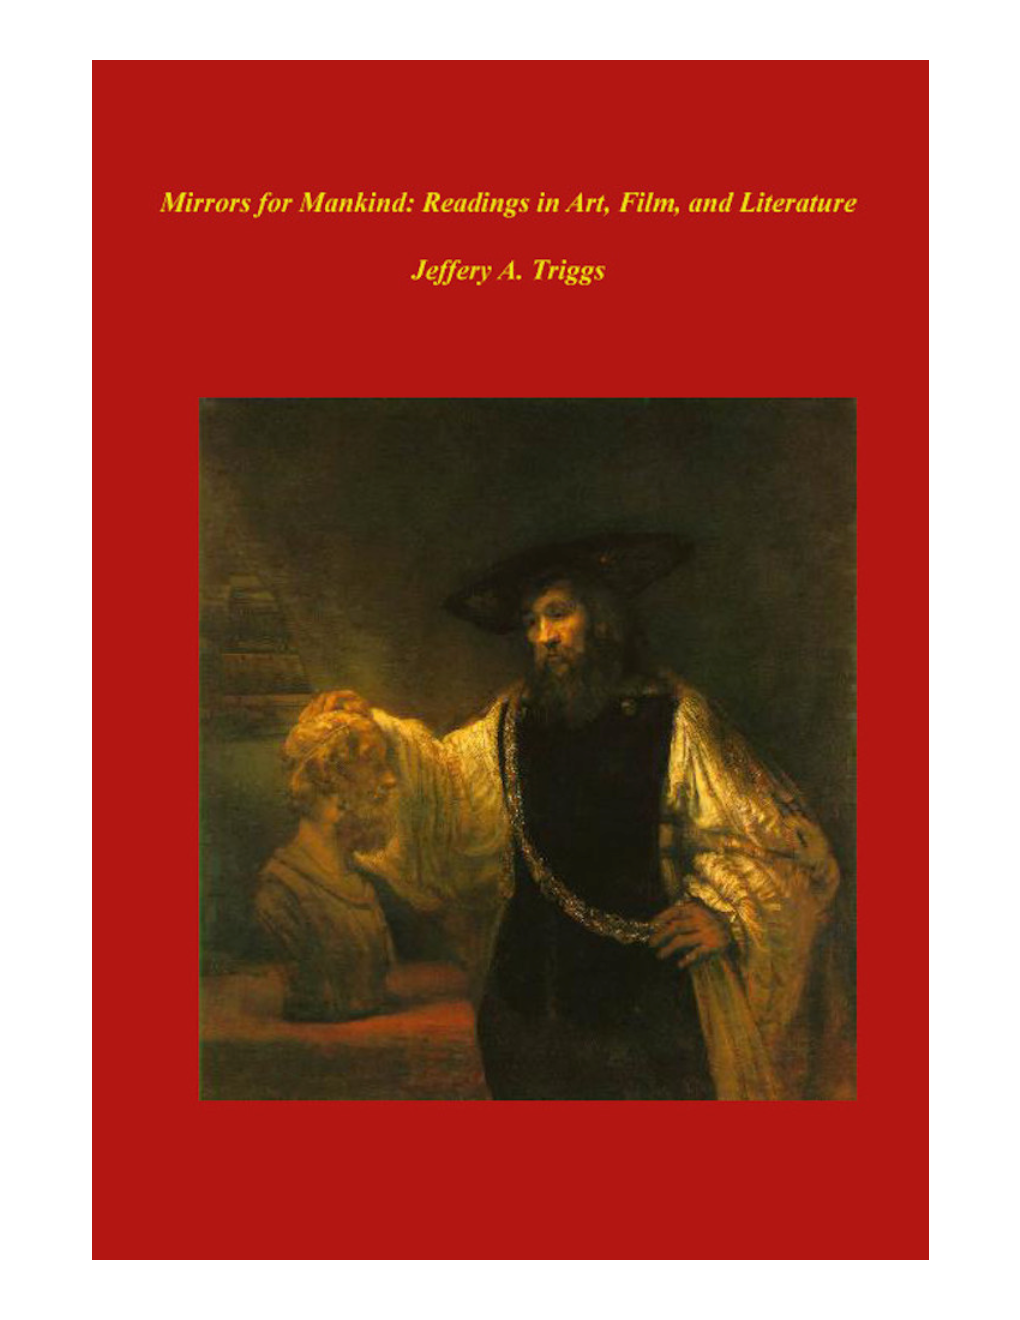 Mirrors for Mankind: Readings in Art, Film, and Literature